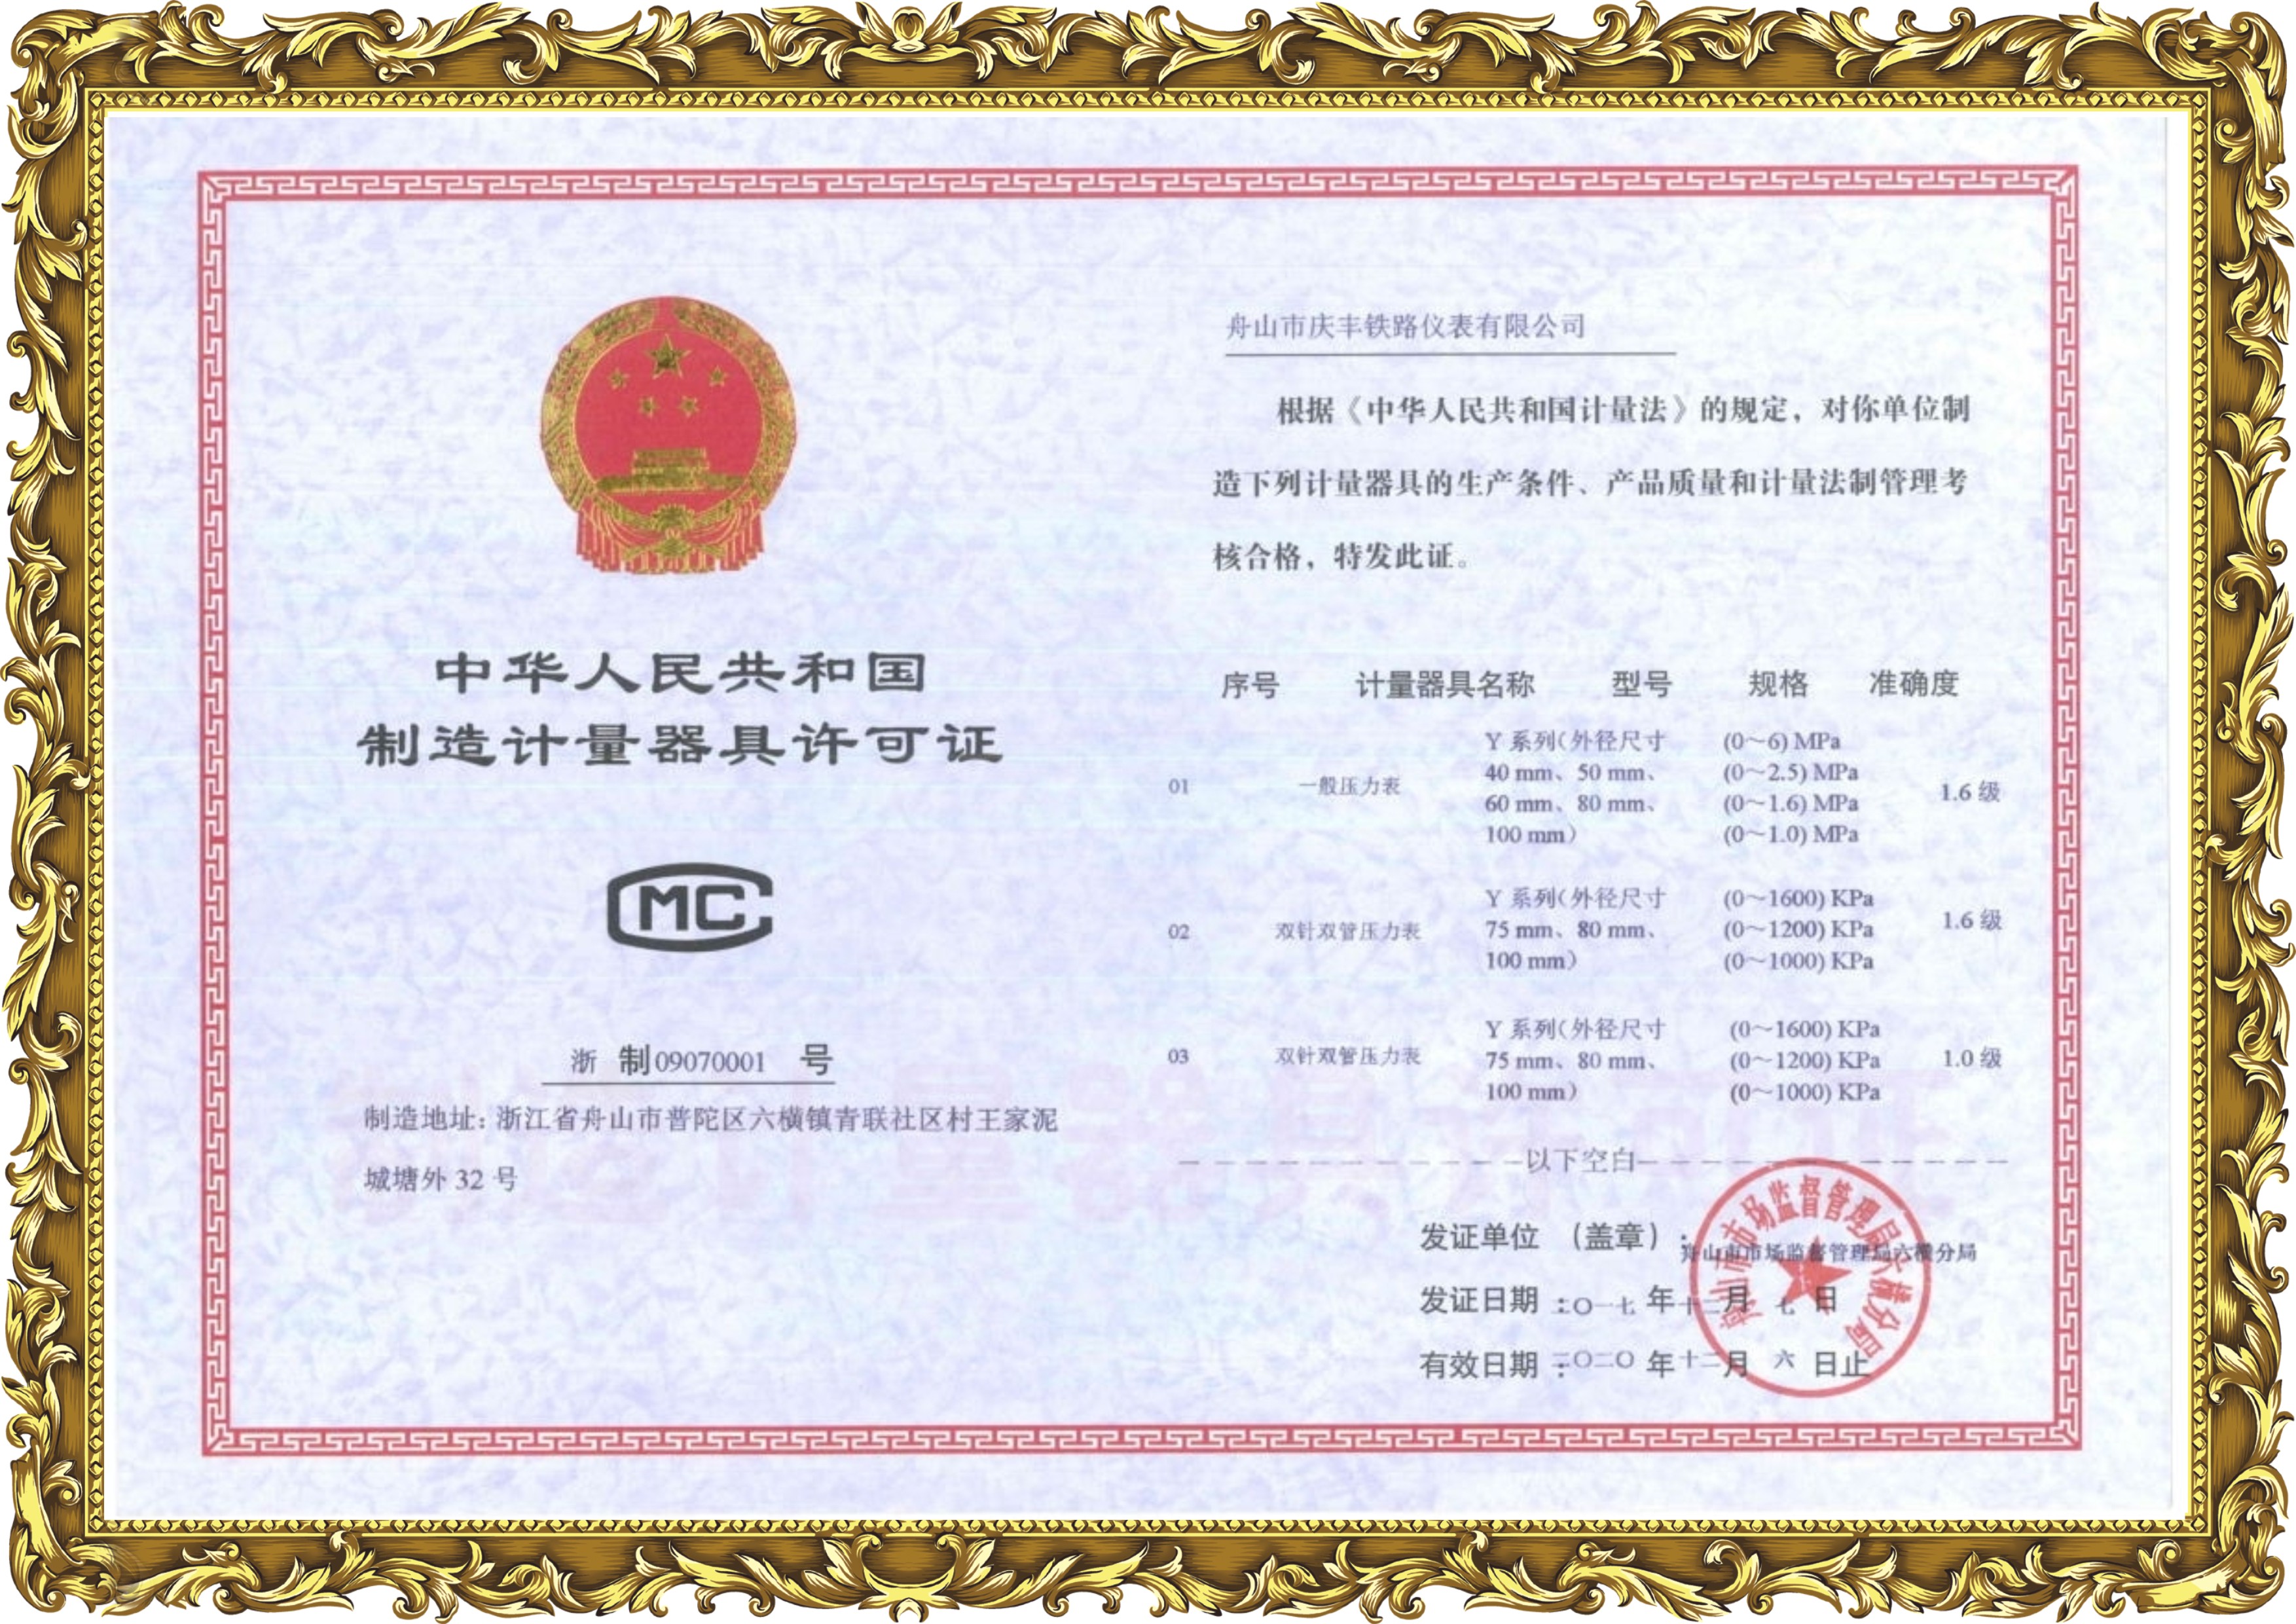 License to manufacture measuring instruments